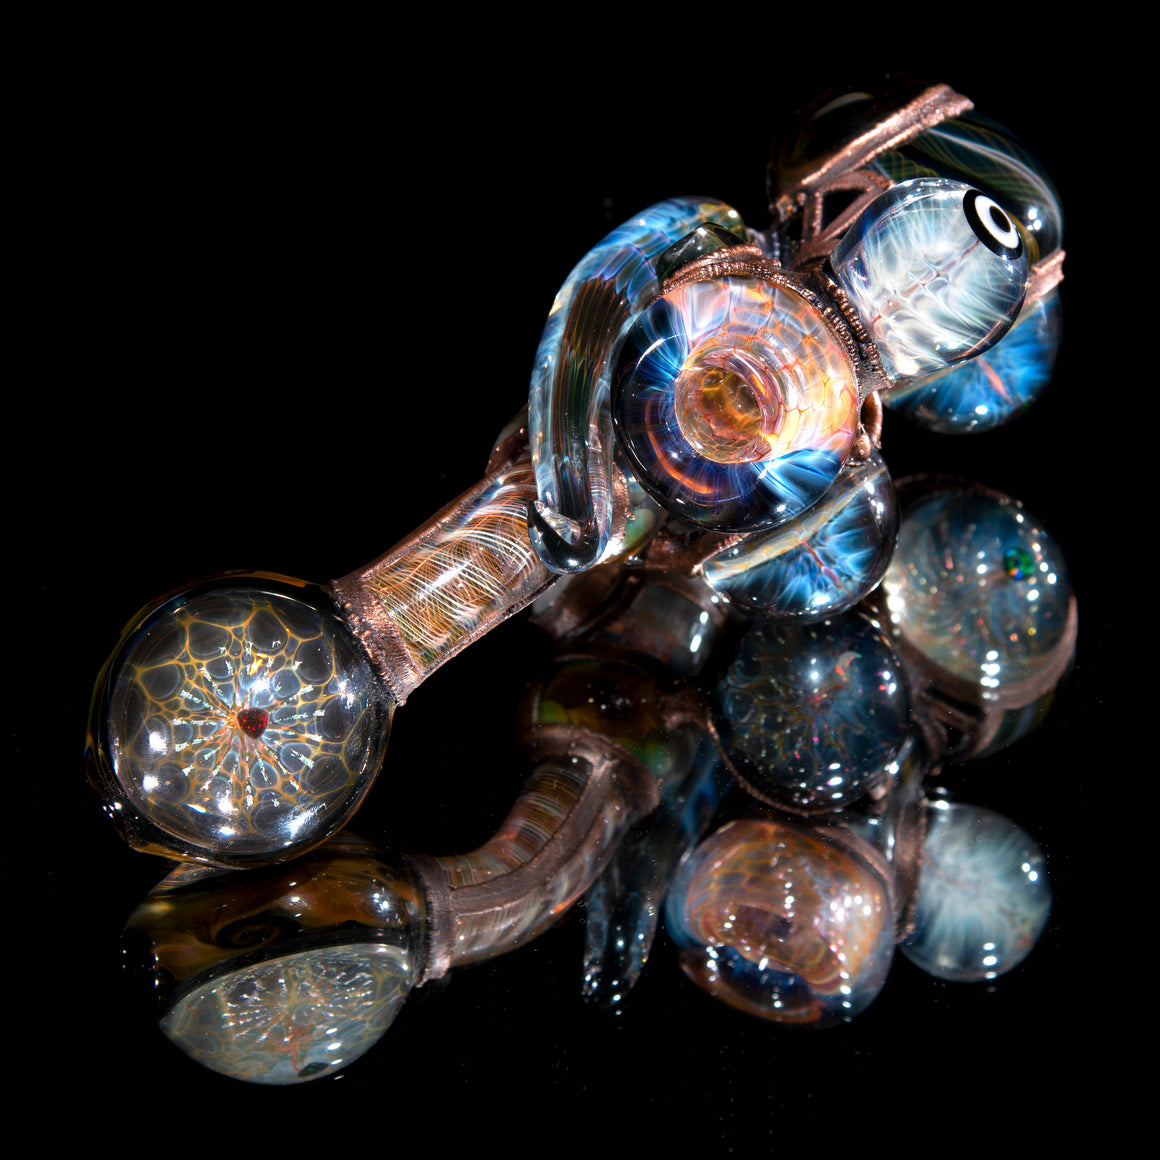 King Radiant Light Sherlock with Electroplating by Caleb Storm